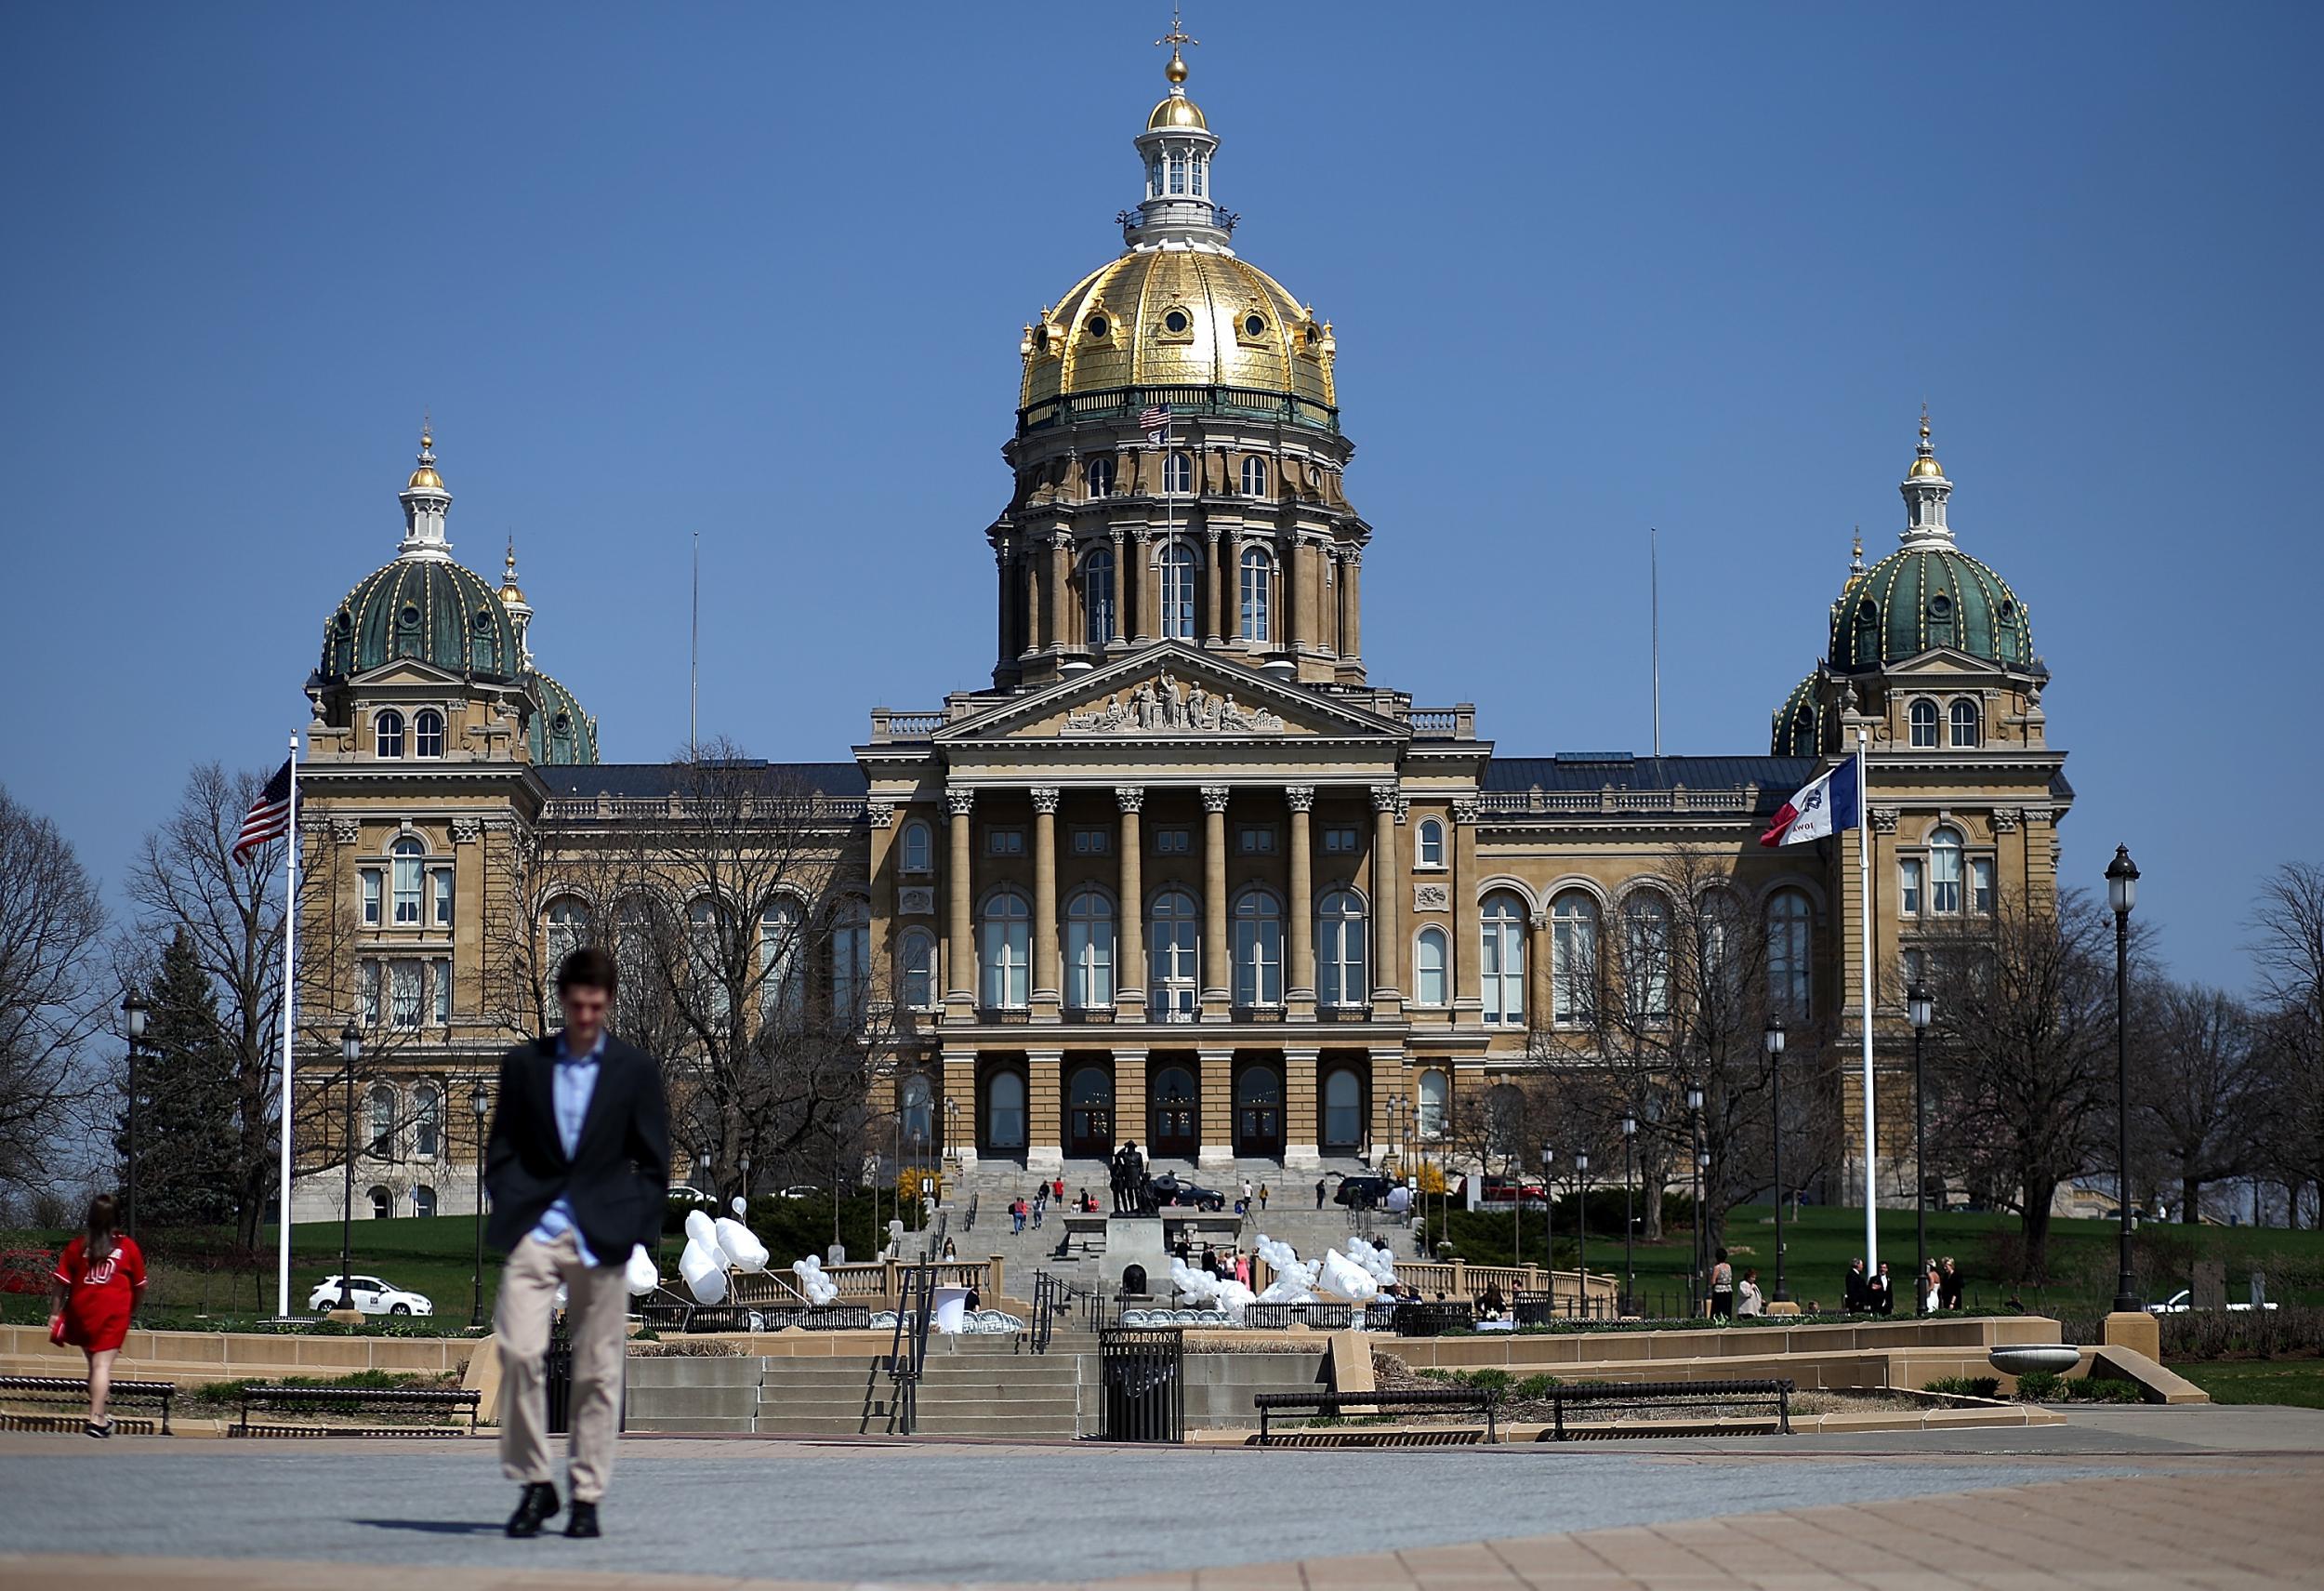 A view of the Iowa state capitol on April 11, 2015 in Des Moines, Iowa